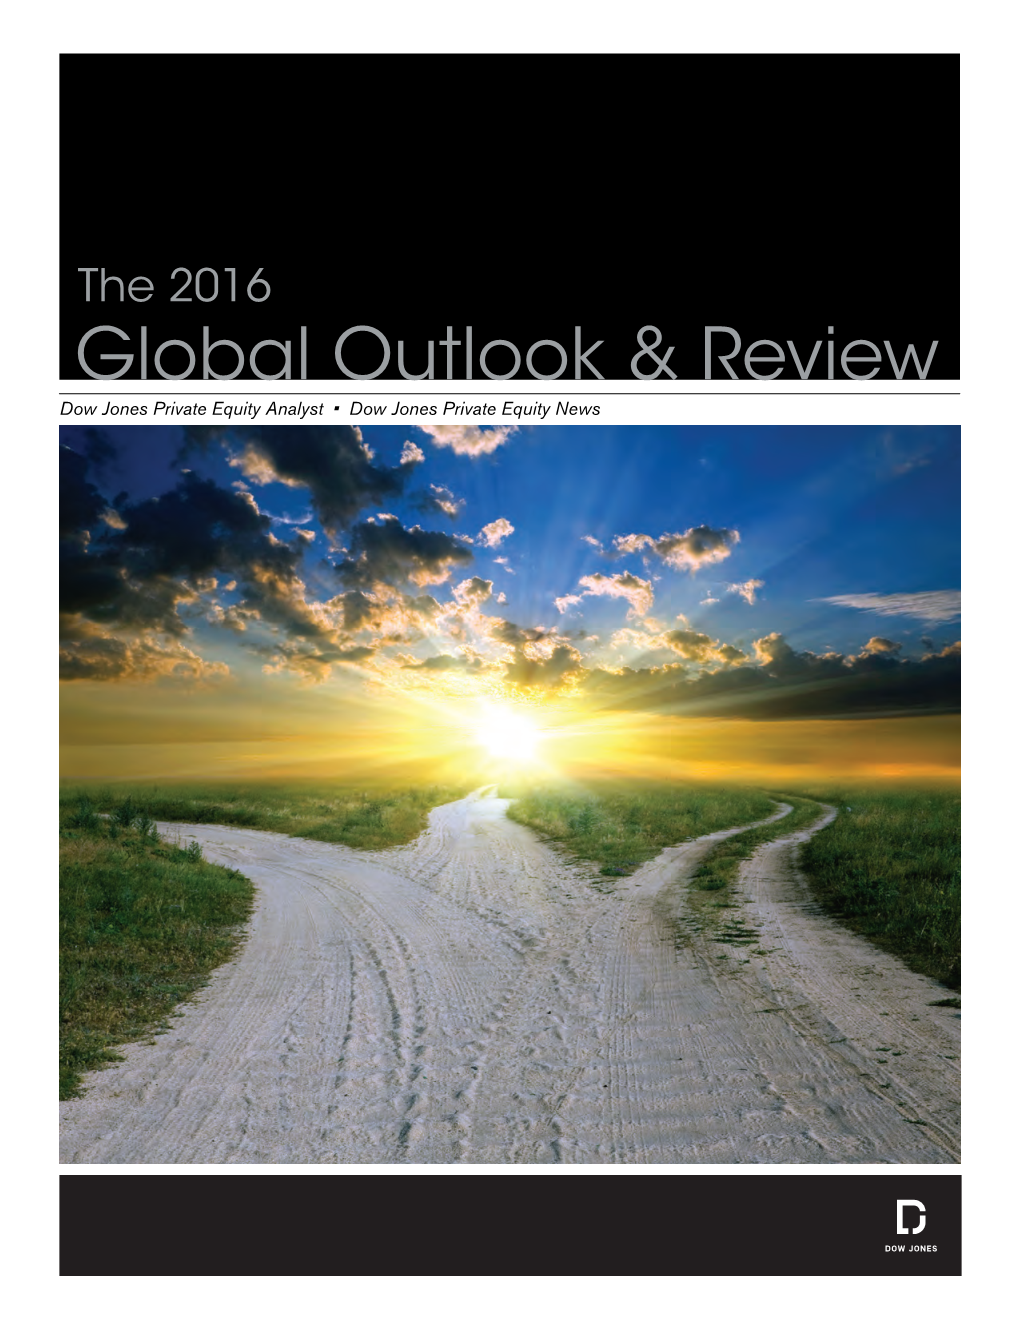 Global Outlook & Review